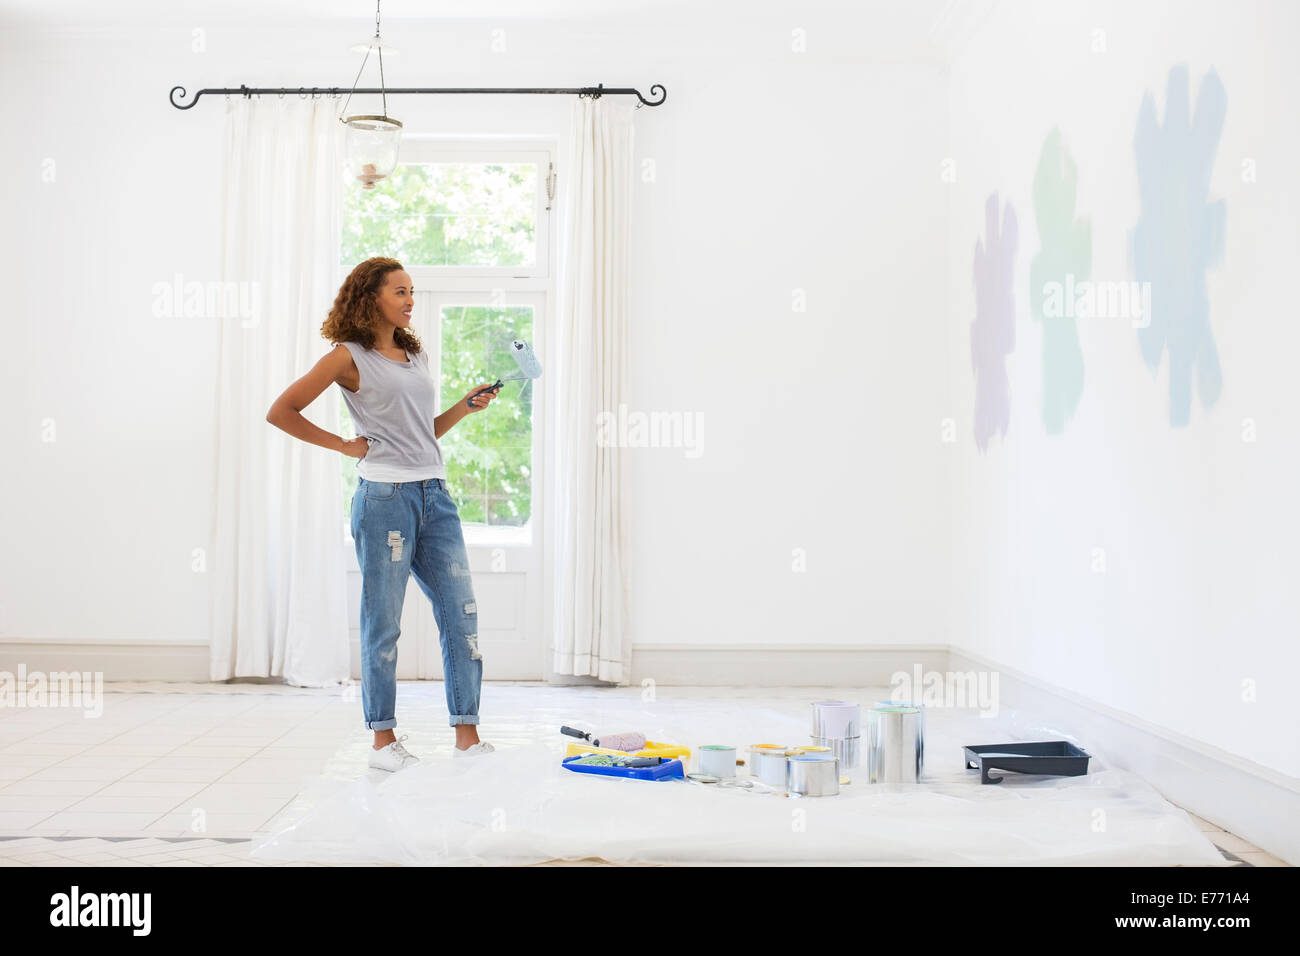 Woman observing paint swatches Stock Photo